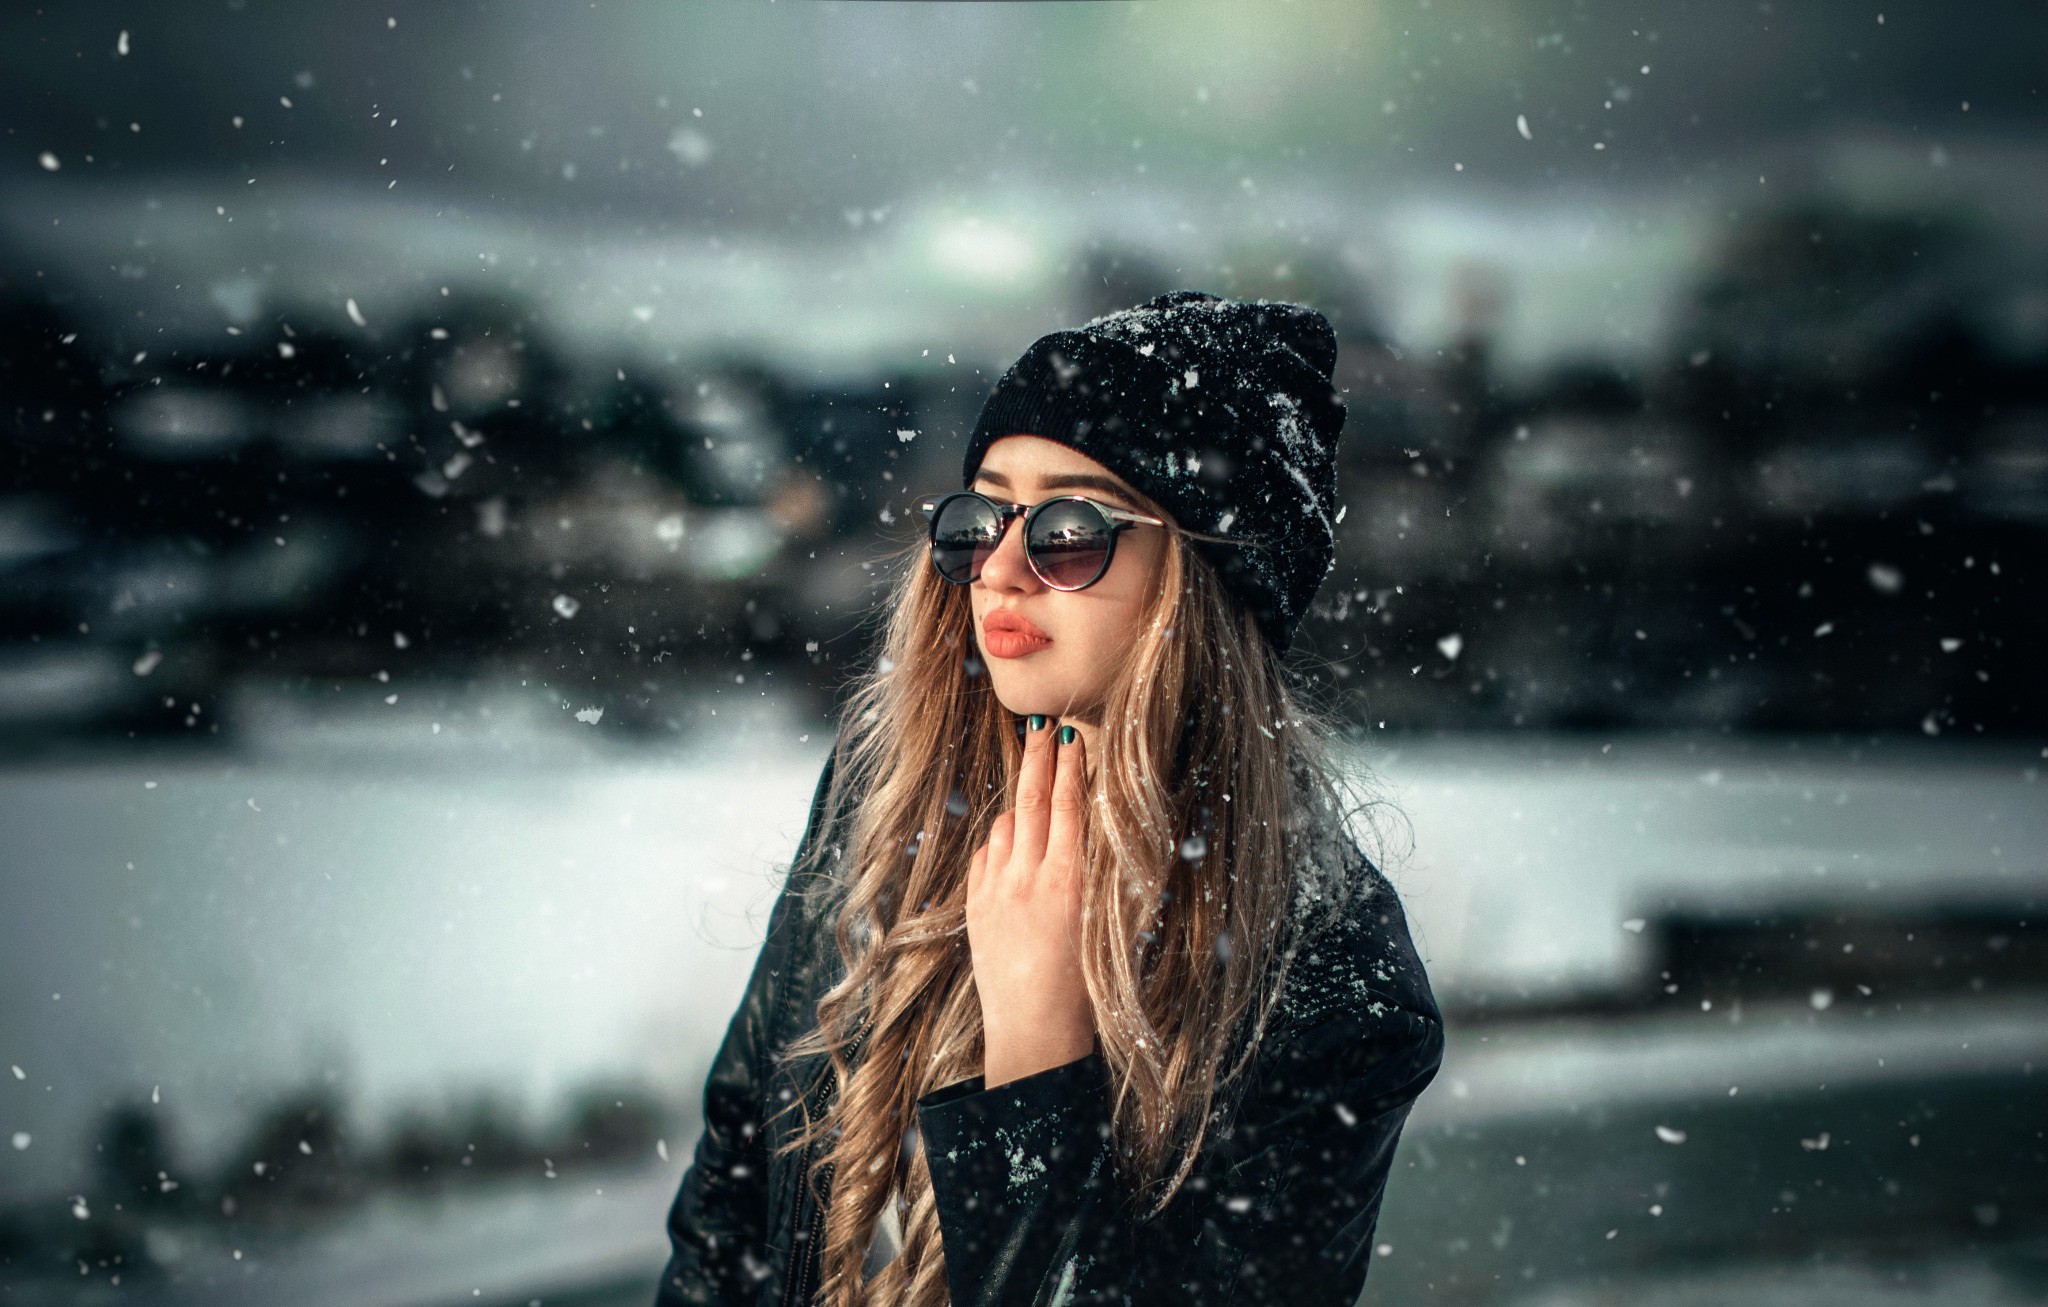 women, Model, Women With Glasses, Snow Wallpaper HD / Desktop and Mobile Background